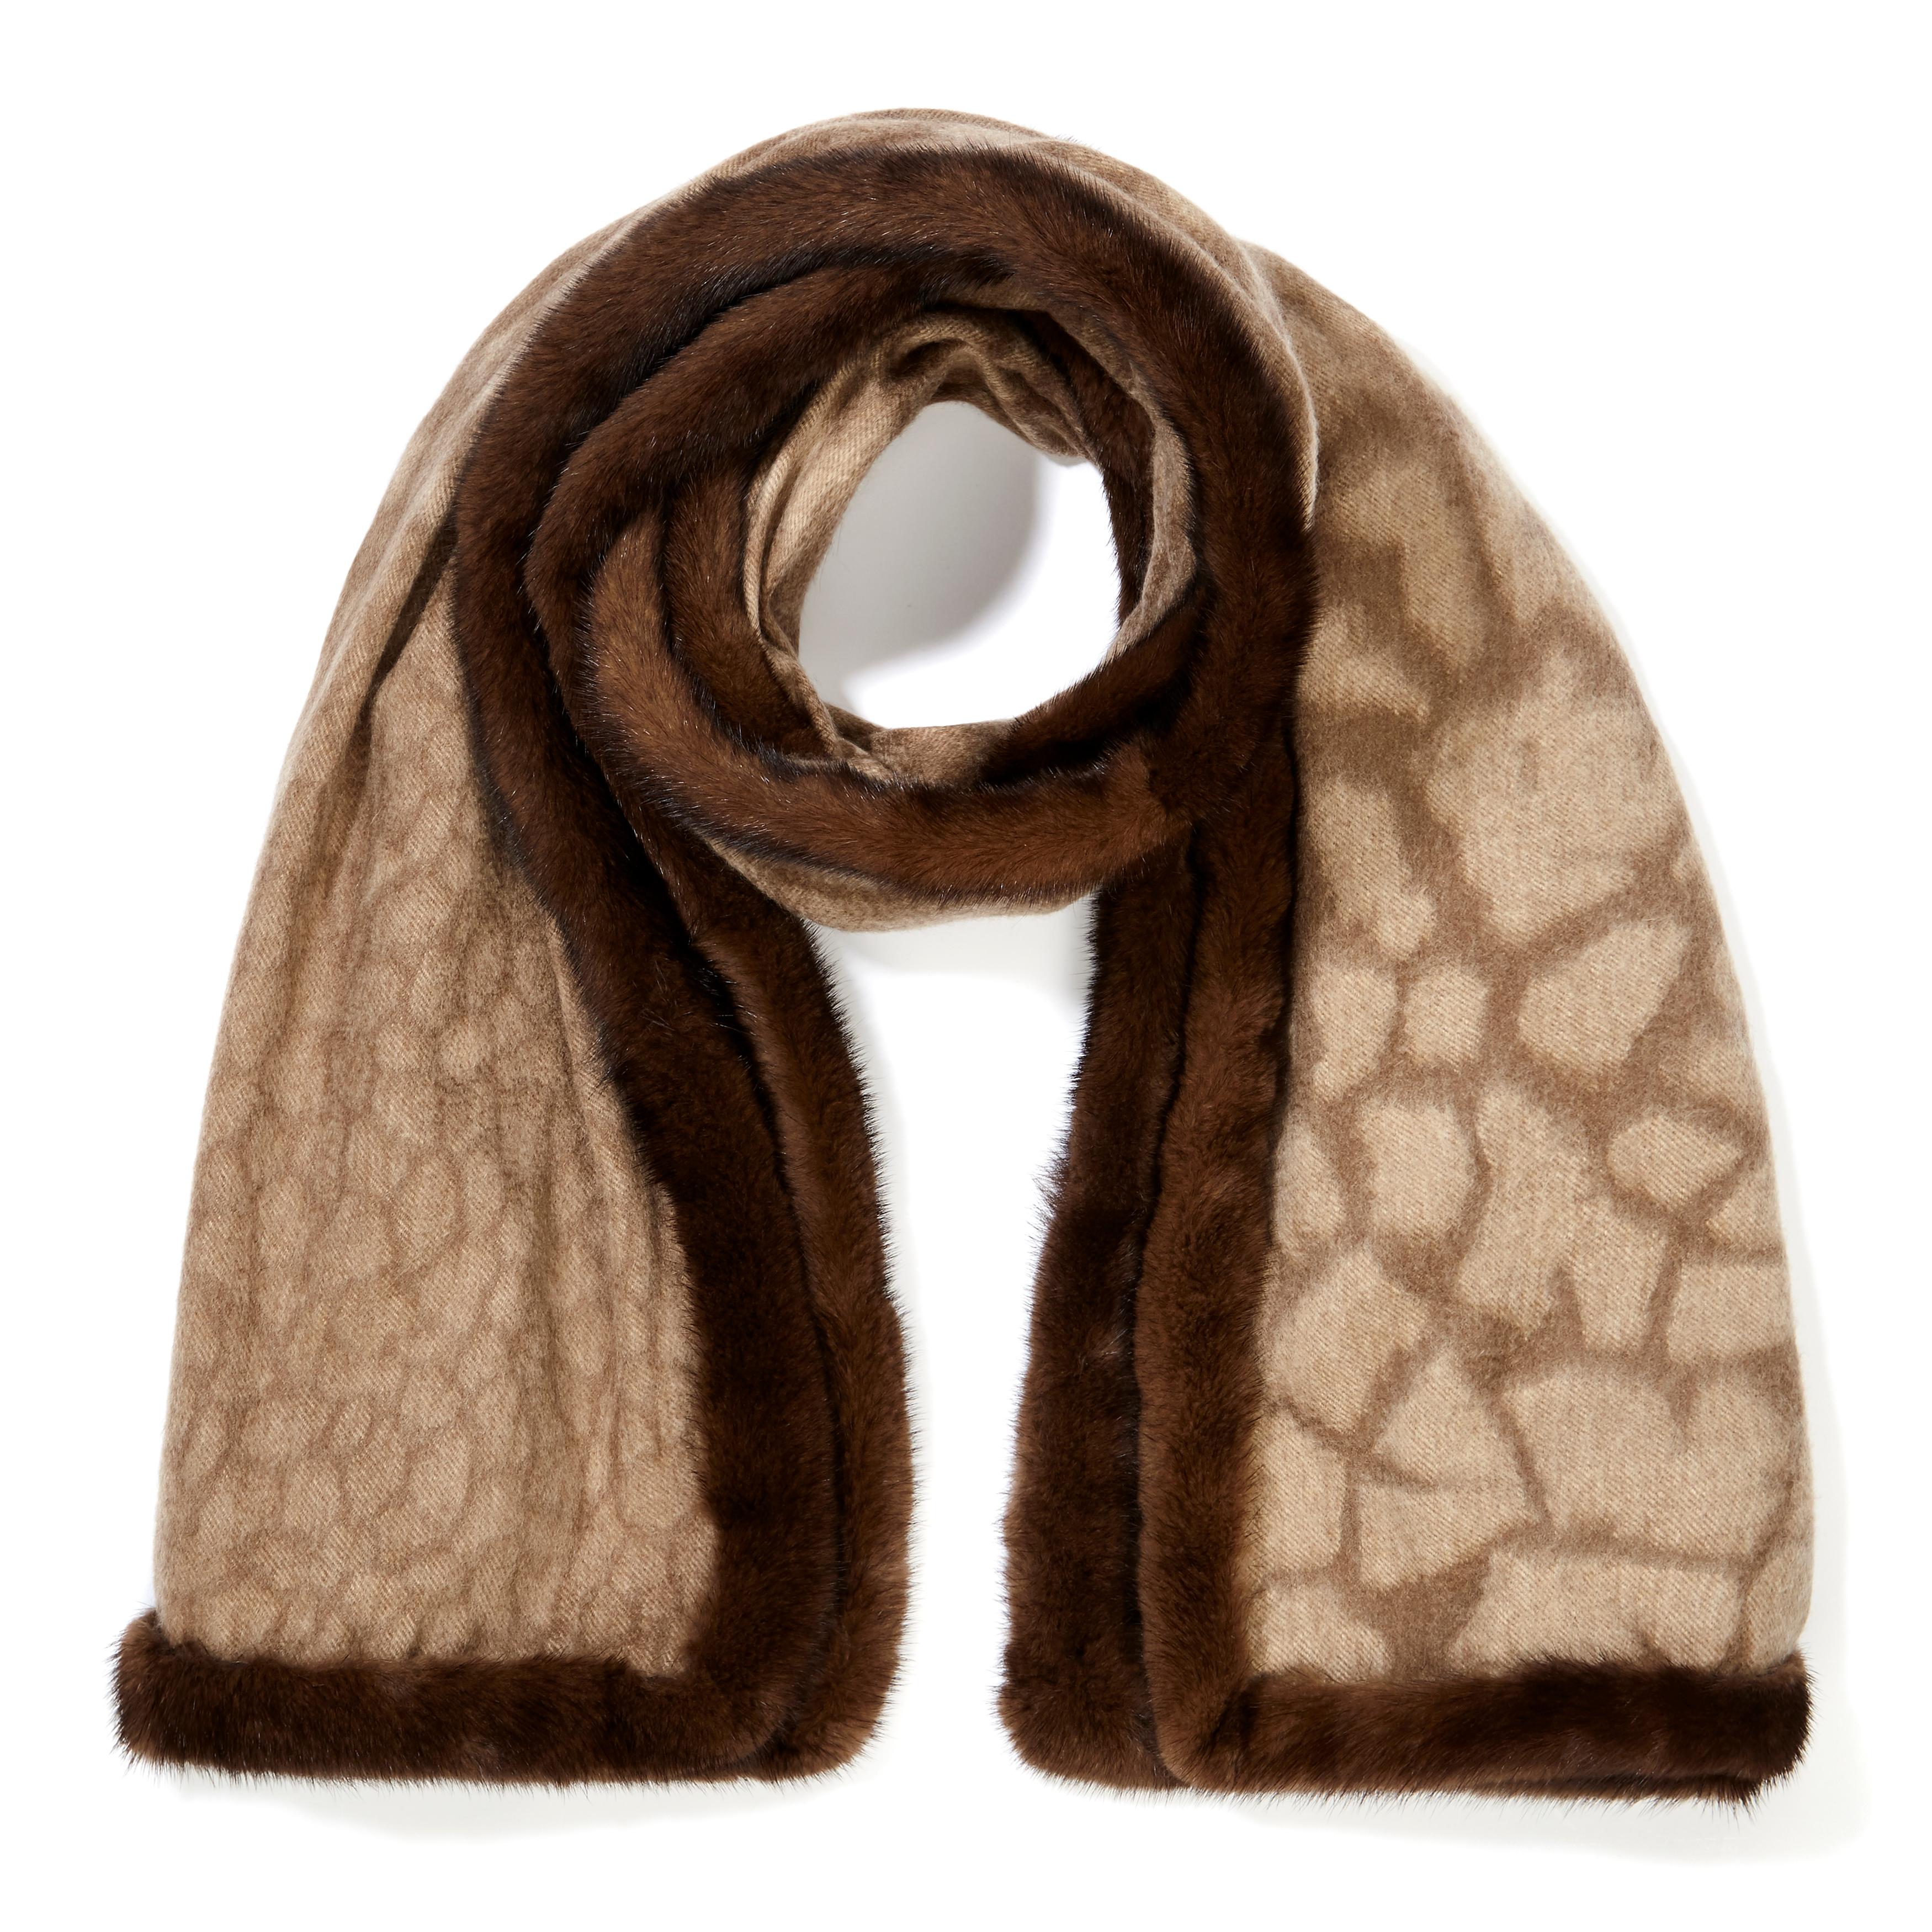 Verheyen London Mink Fur Trimmed Cashmere Scarf in Brown Leopard - Brand New  

The perfect Christmas Gift for someone special - monogramming available on request. 

Verheyen London’s shawl is spun from the finest Scottish woven cashmere and